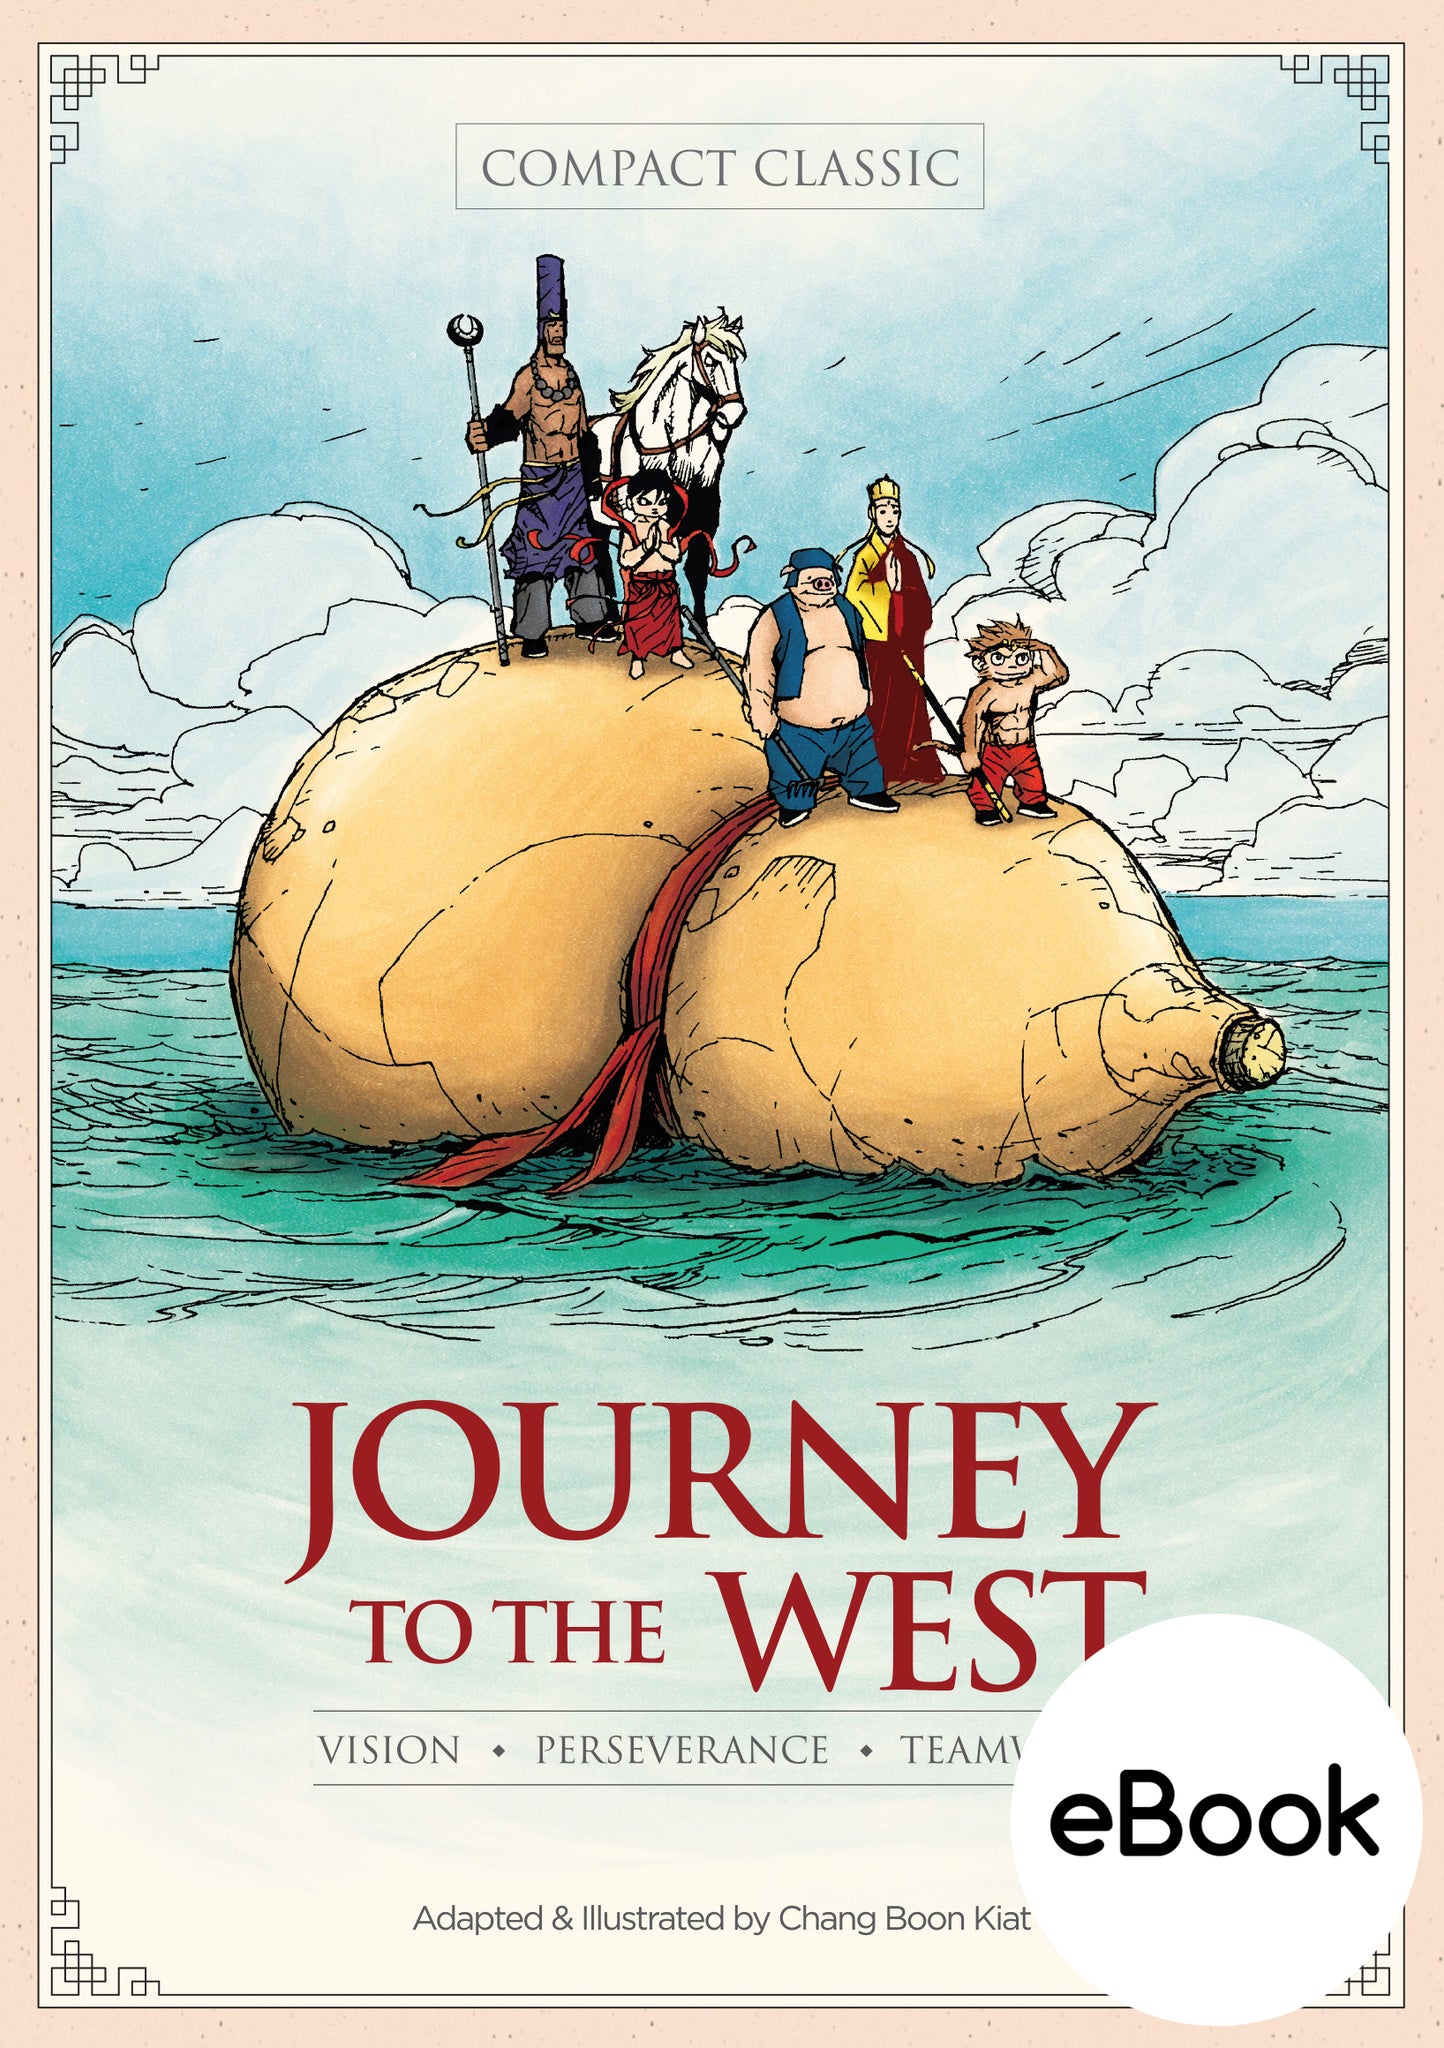 Journey to the West (eBook)